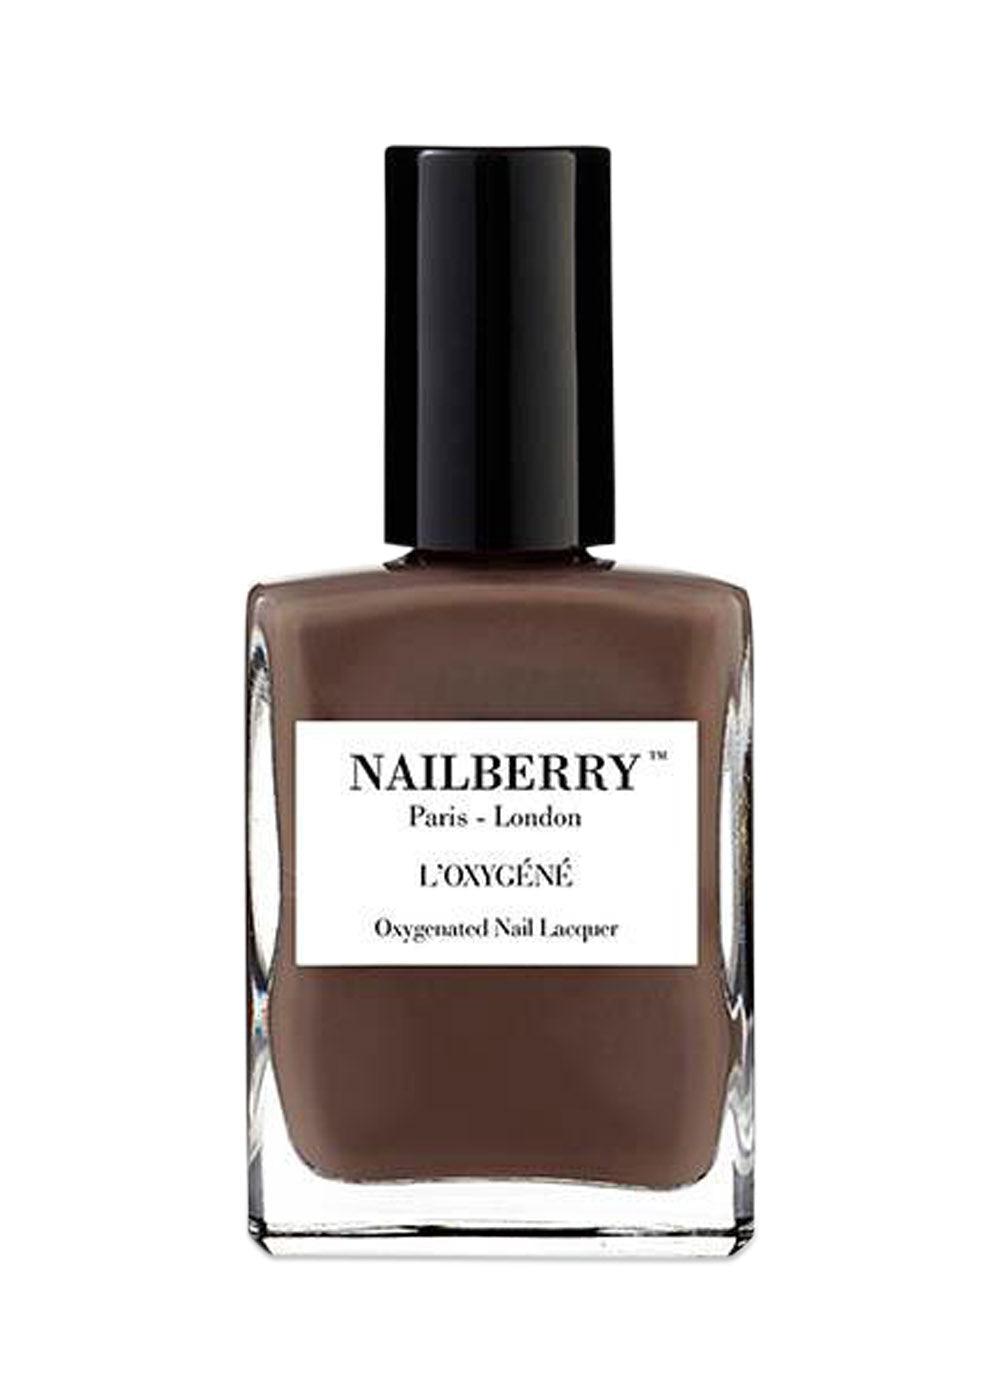 Nailberrys Taupe La 15 ml - Oxygenated Deep Taupe. Køb accessories her.